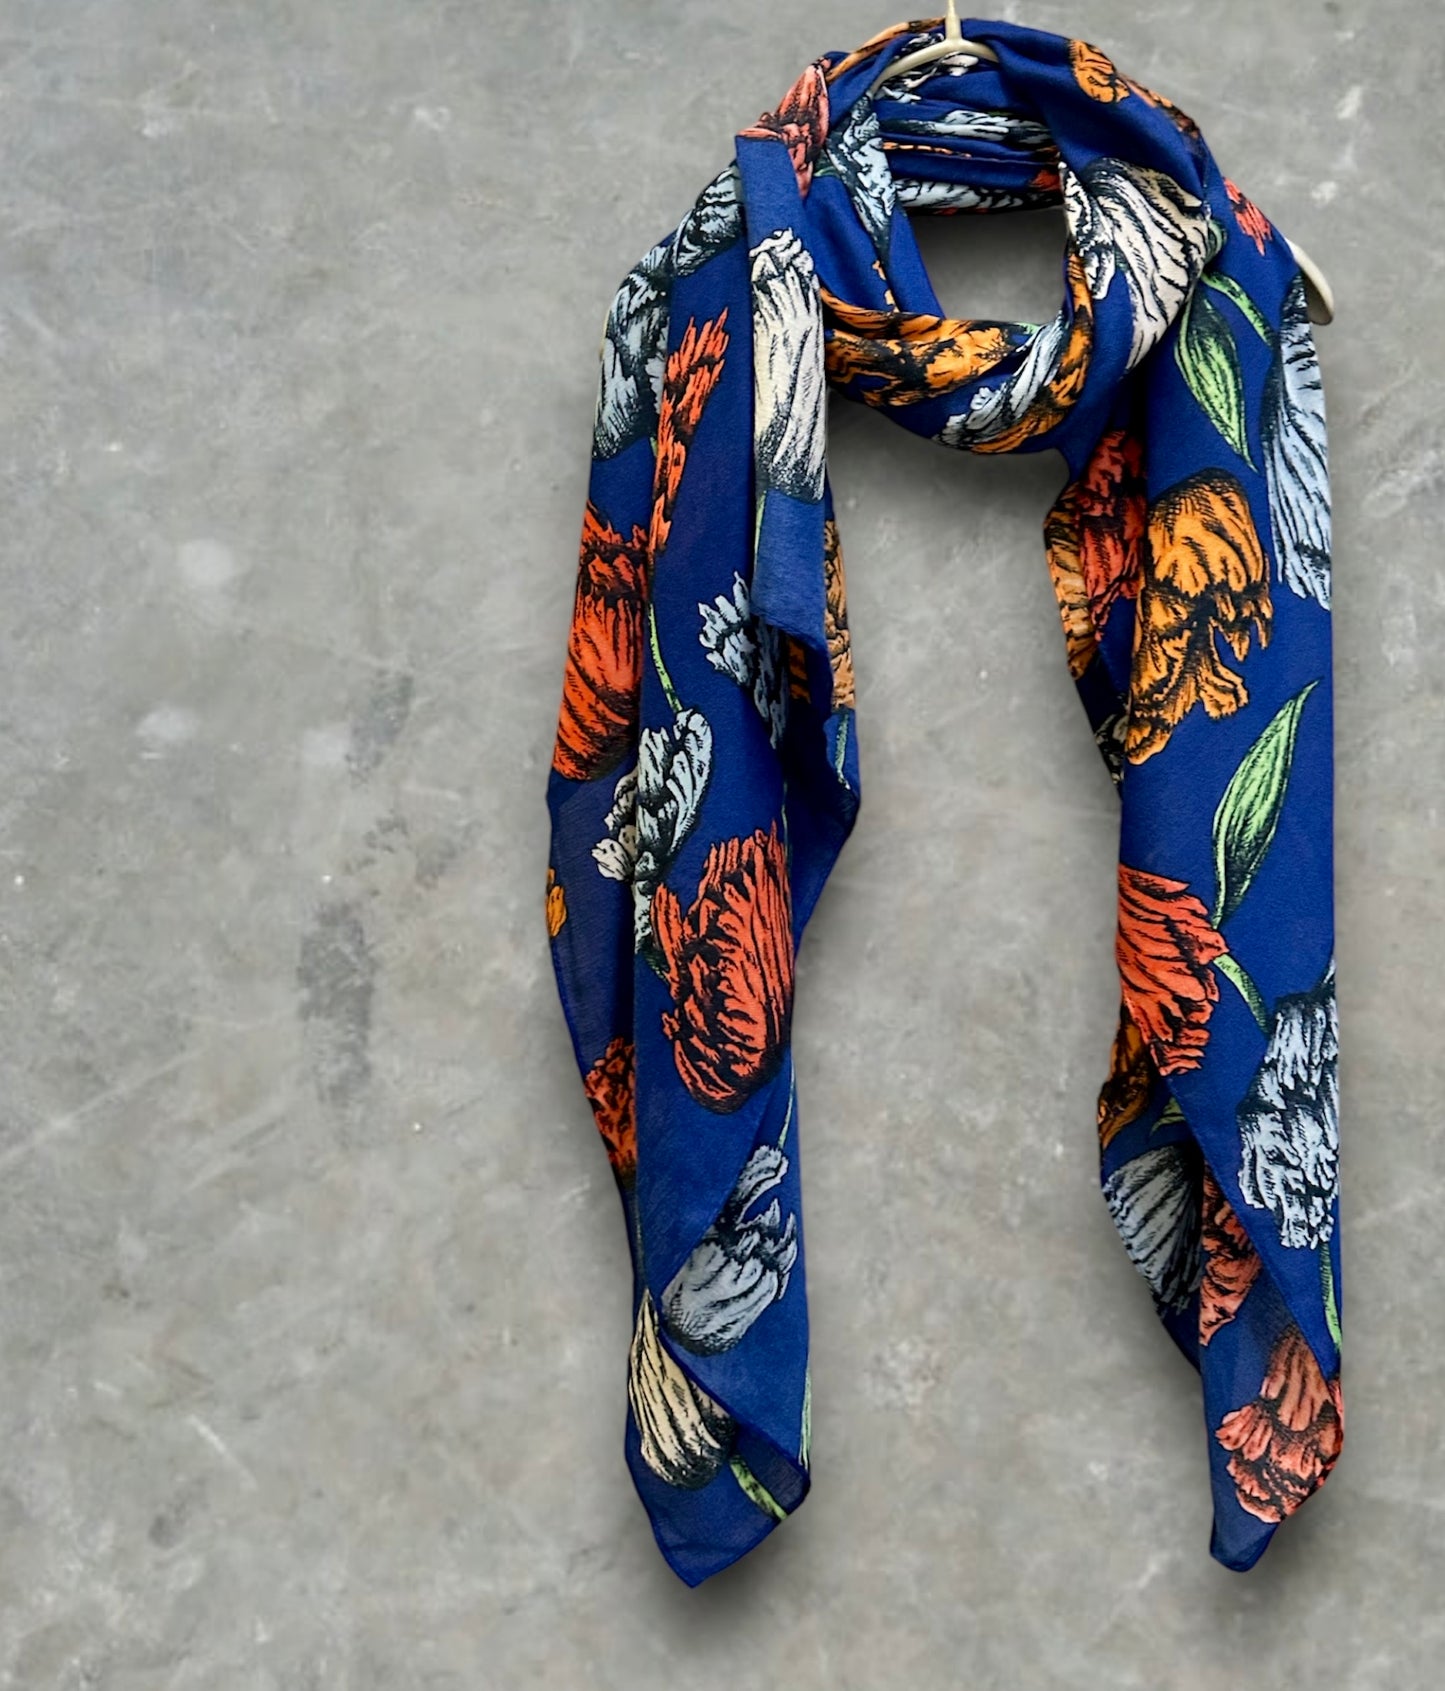 Blue Cotton Scarf with Eco-Friendly Sketched Parrot Tulips Flower Design – A Sustainable Gift for Mom and Her, Ideal for Birthday and Christmas Celebrations